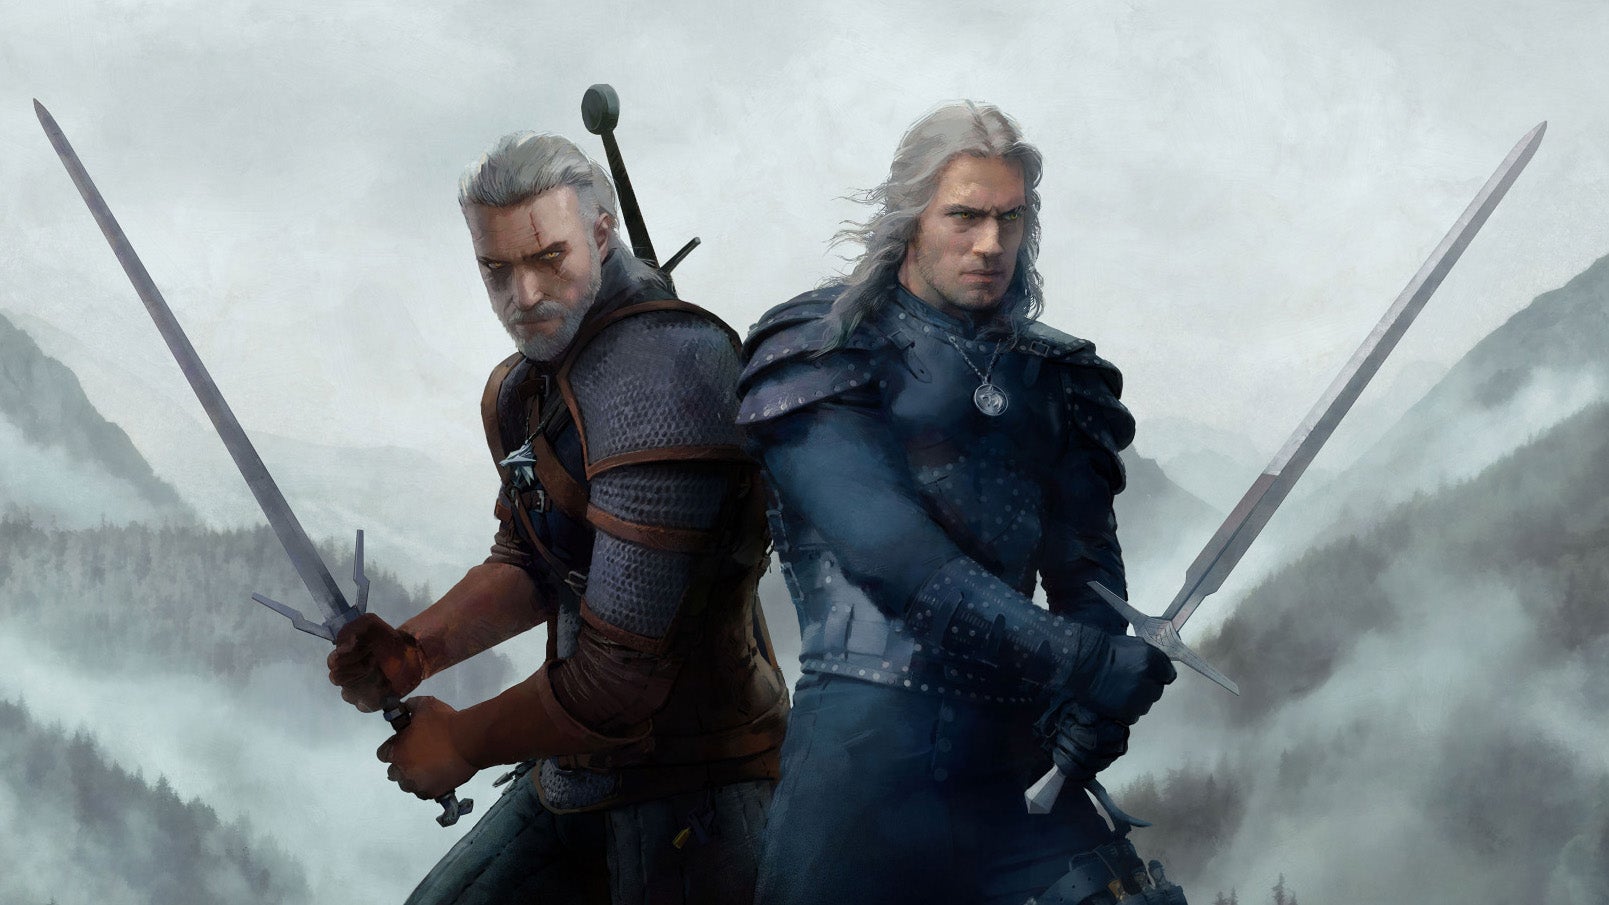 A detailed illustration of game-Geralt and Netflix-Geralt standing side by side with swords drawn, ready for action. That sounds rude now I think of it.